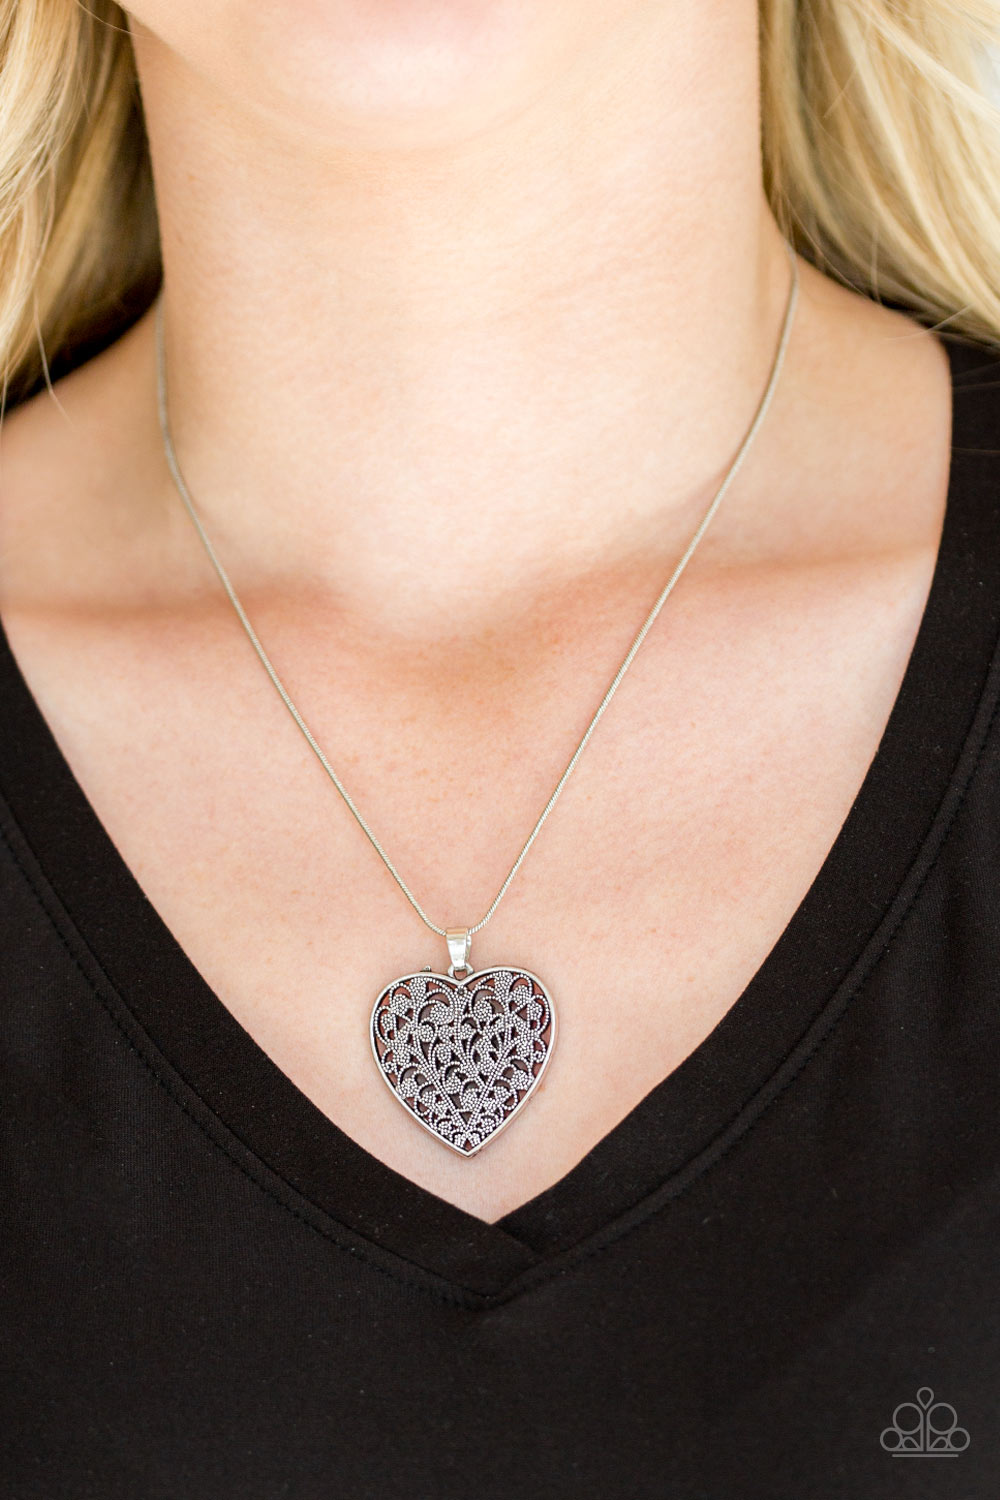 Look Into Your Heart Necklace - Silver